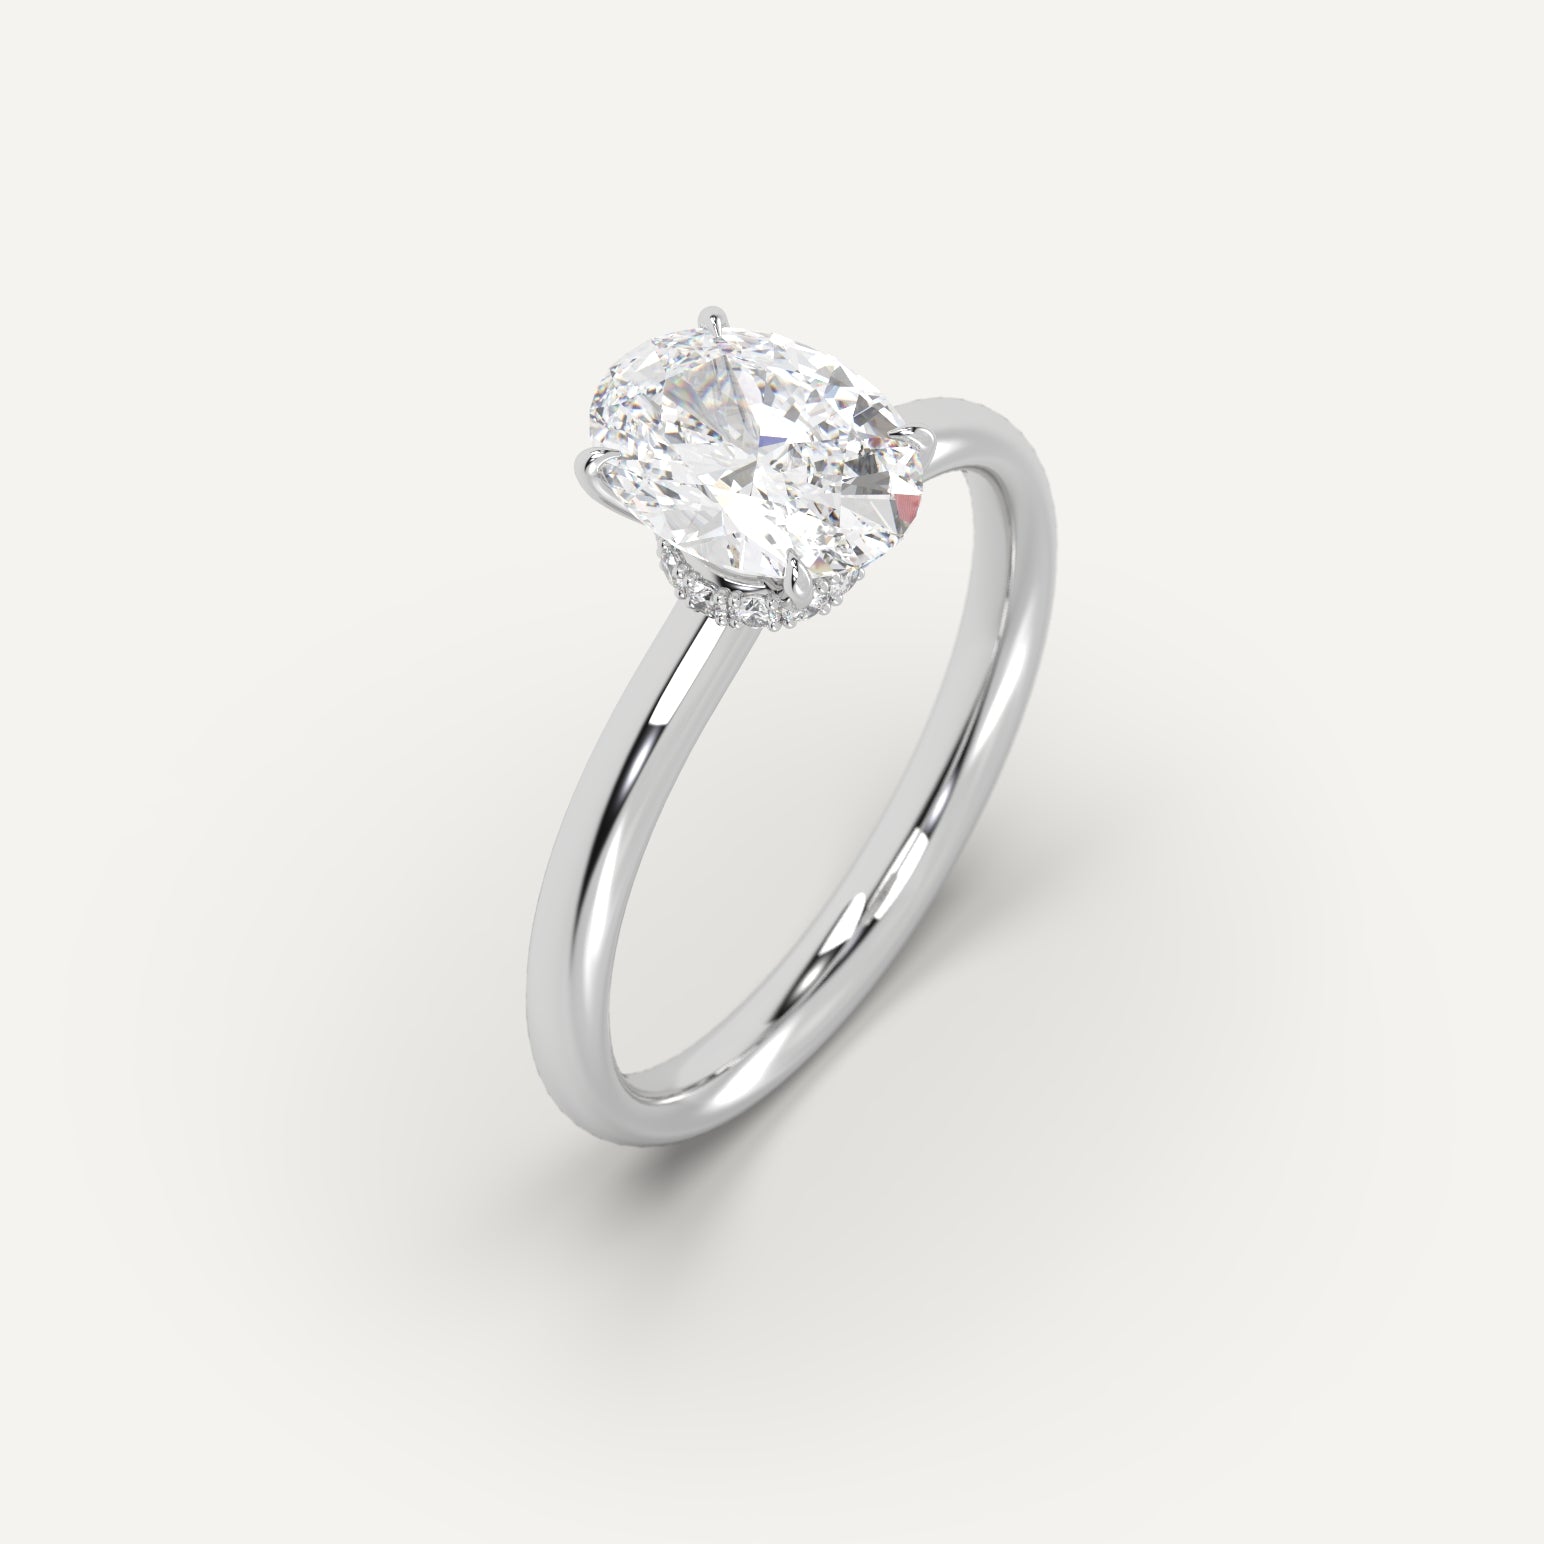 2 carat Oval Cut Engagement Ring in 14k White Gold